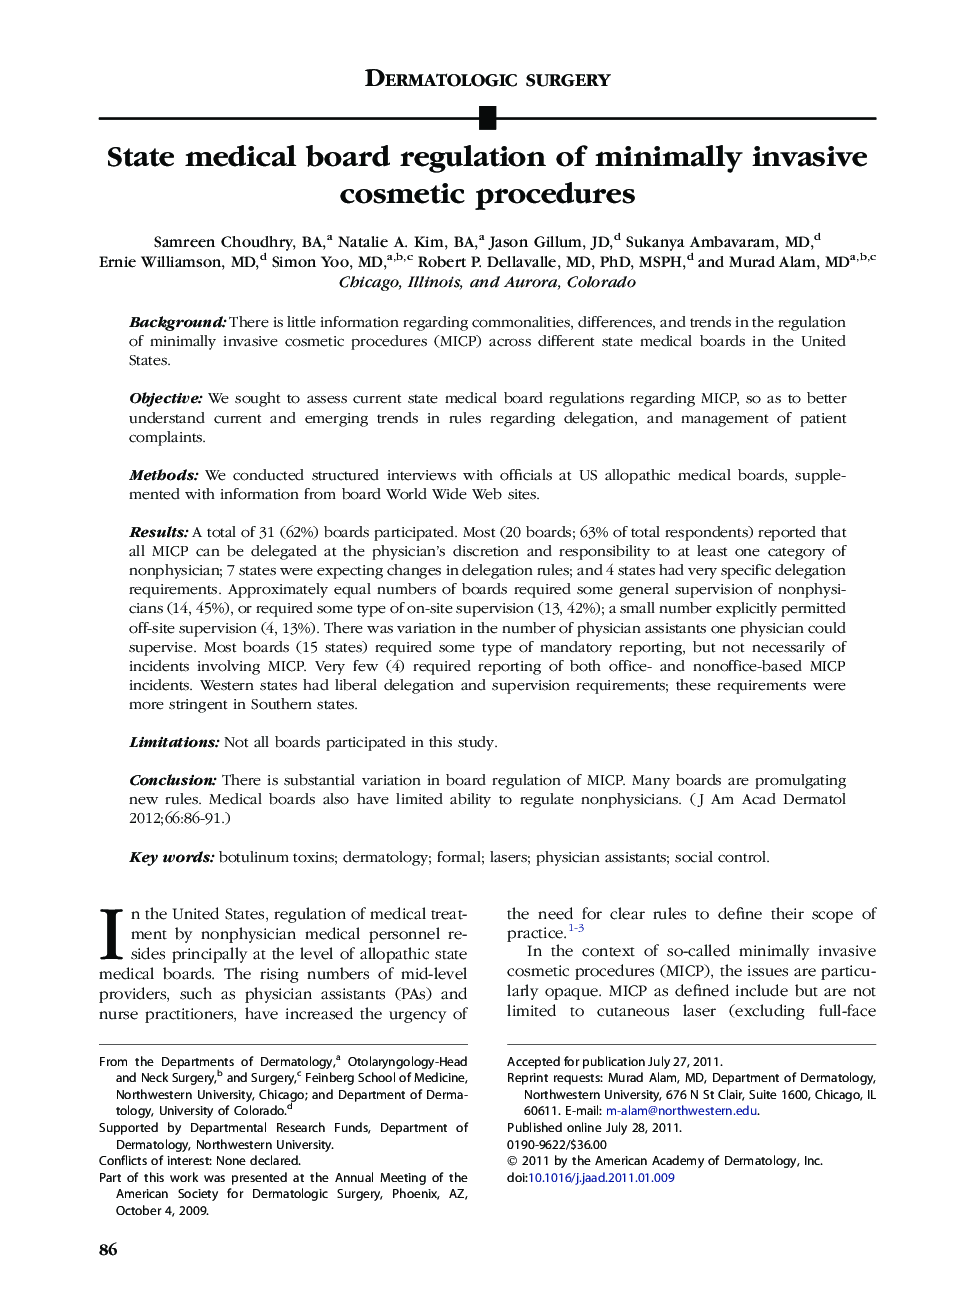 State medical board regulation of minimally invasive cosmetic procedures 